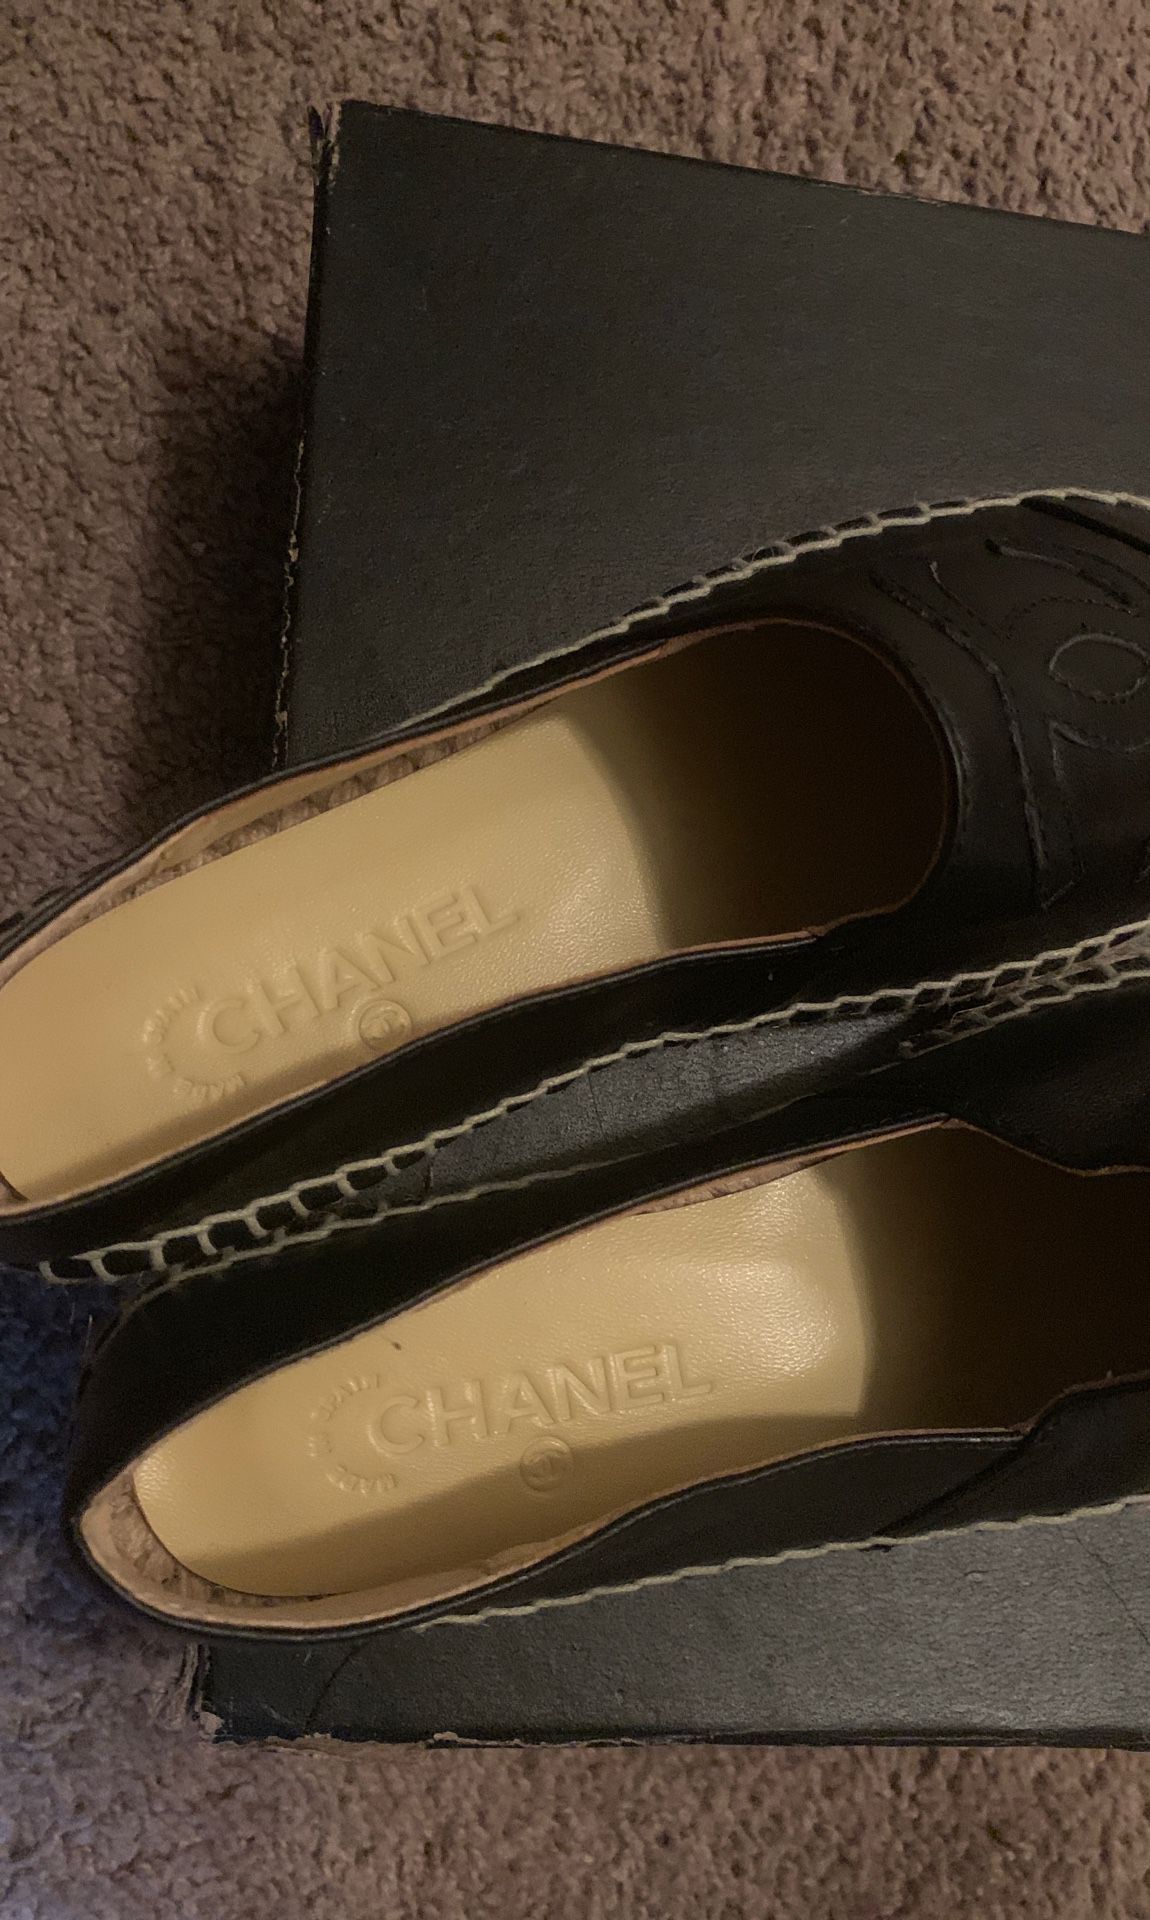 Channel shoes for Sale in E RNCHO DMNGZ, CA - OfferUp